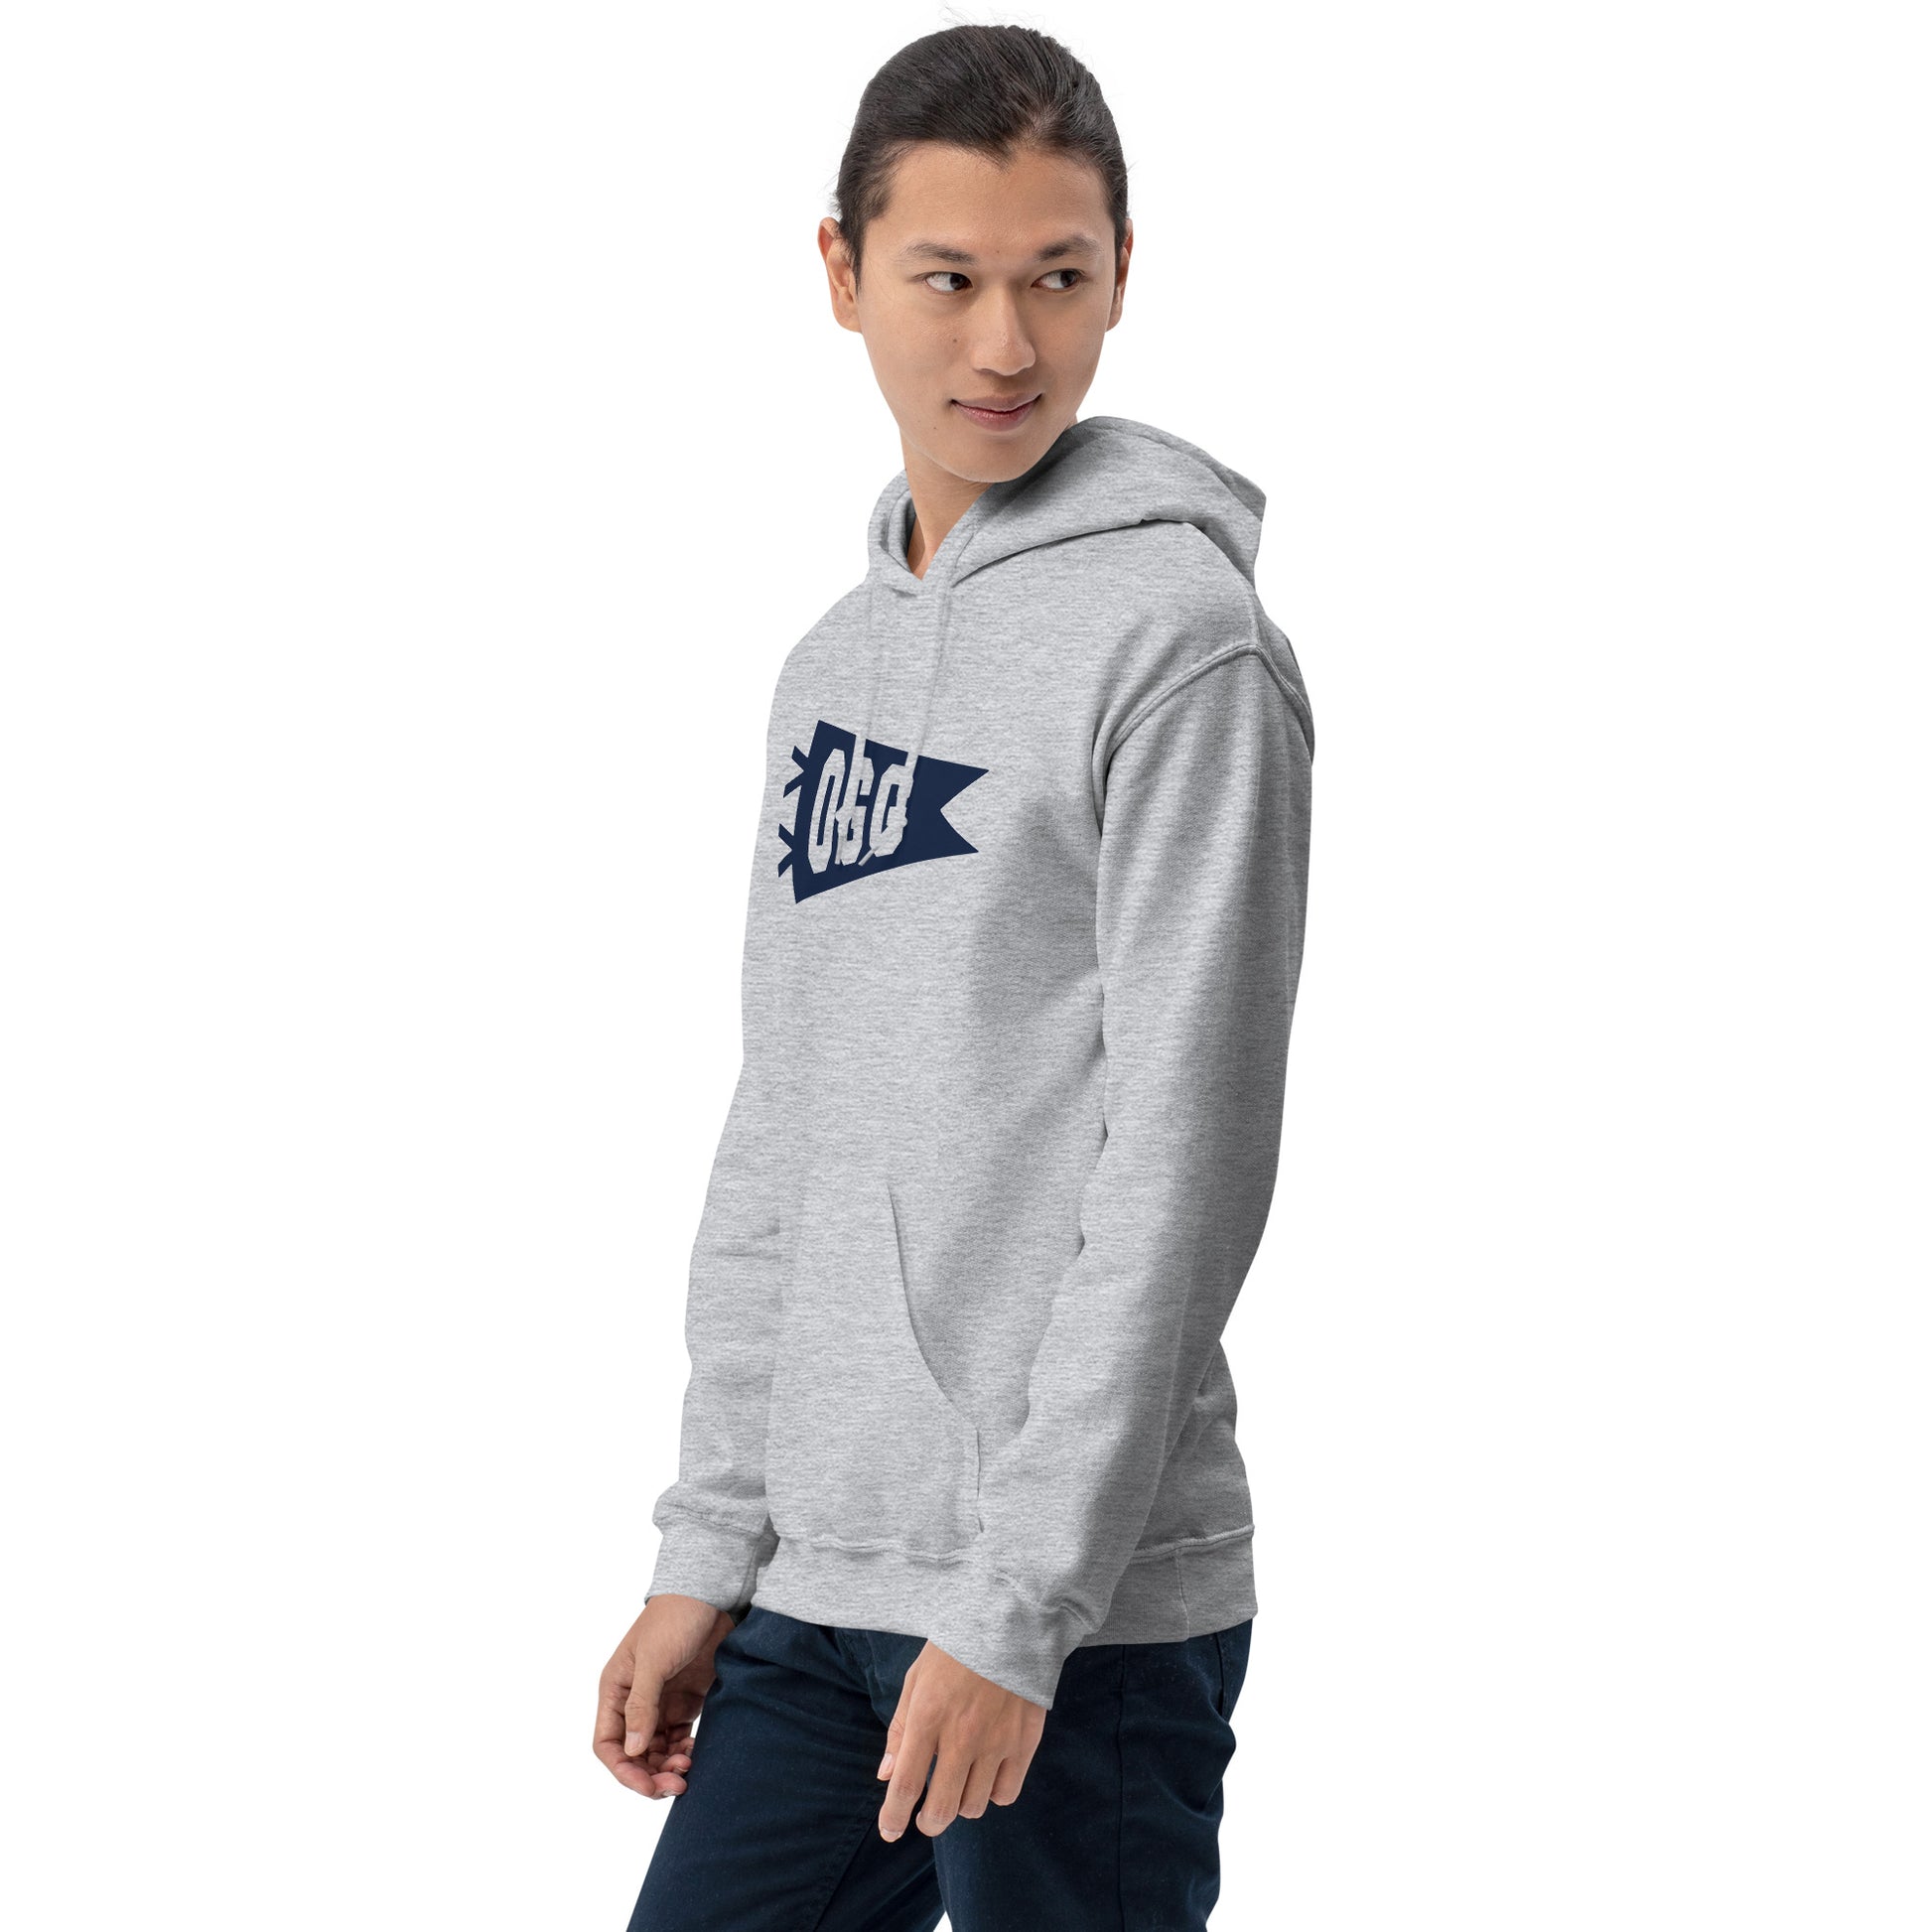 Airport Code Unisex Hoodie - Navy Blue Graphic • OGG Maui • YHM Designs - Image 10